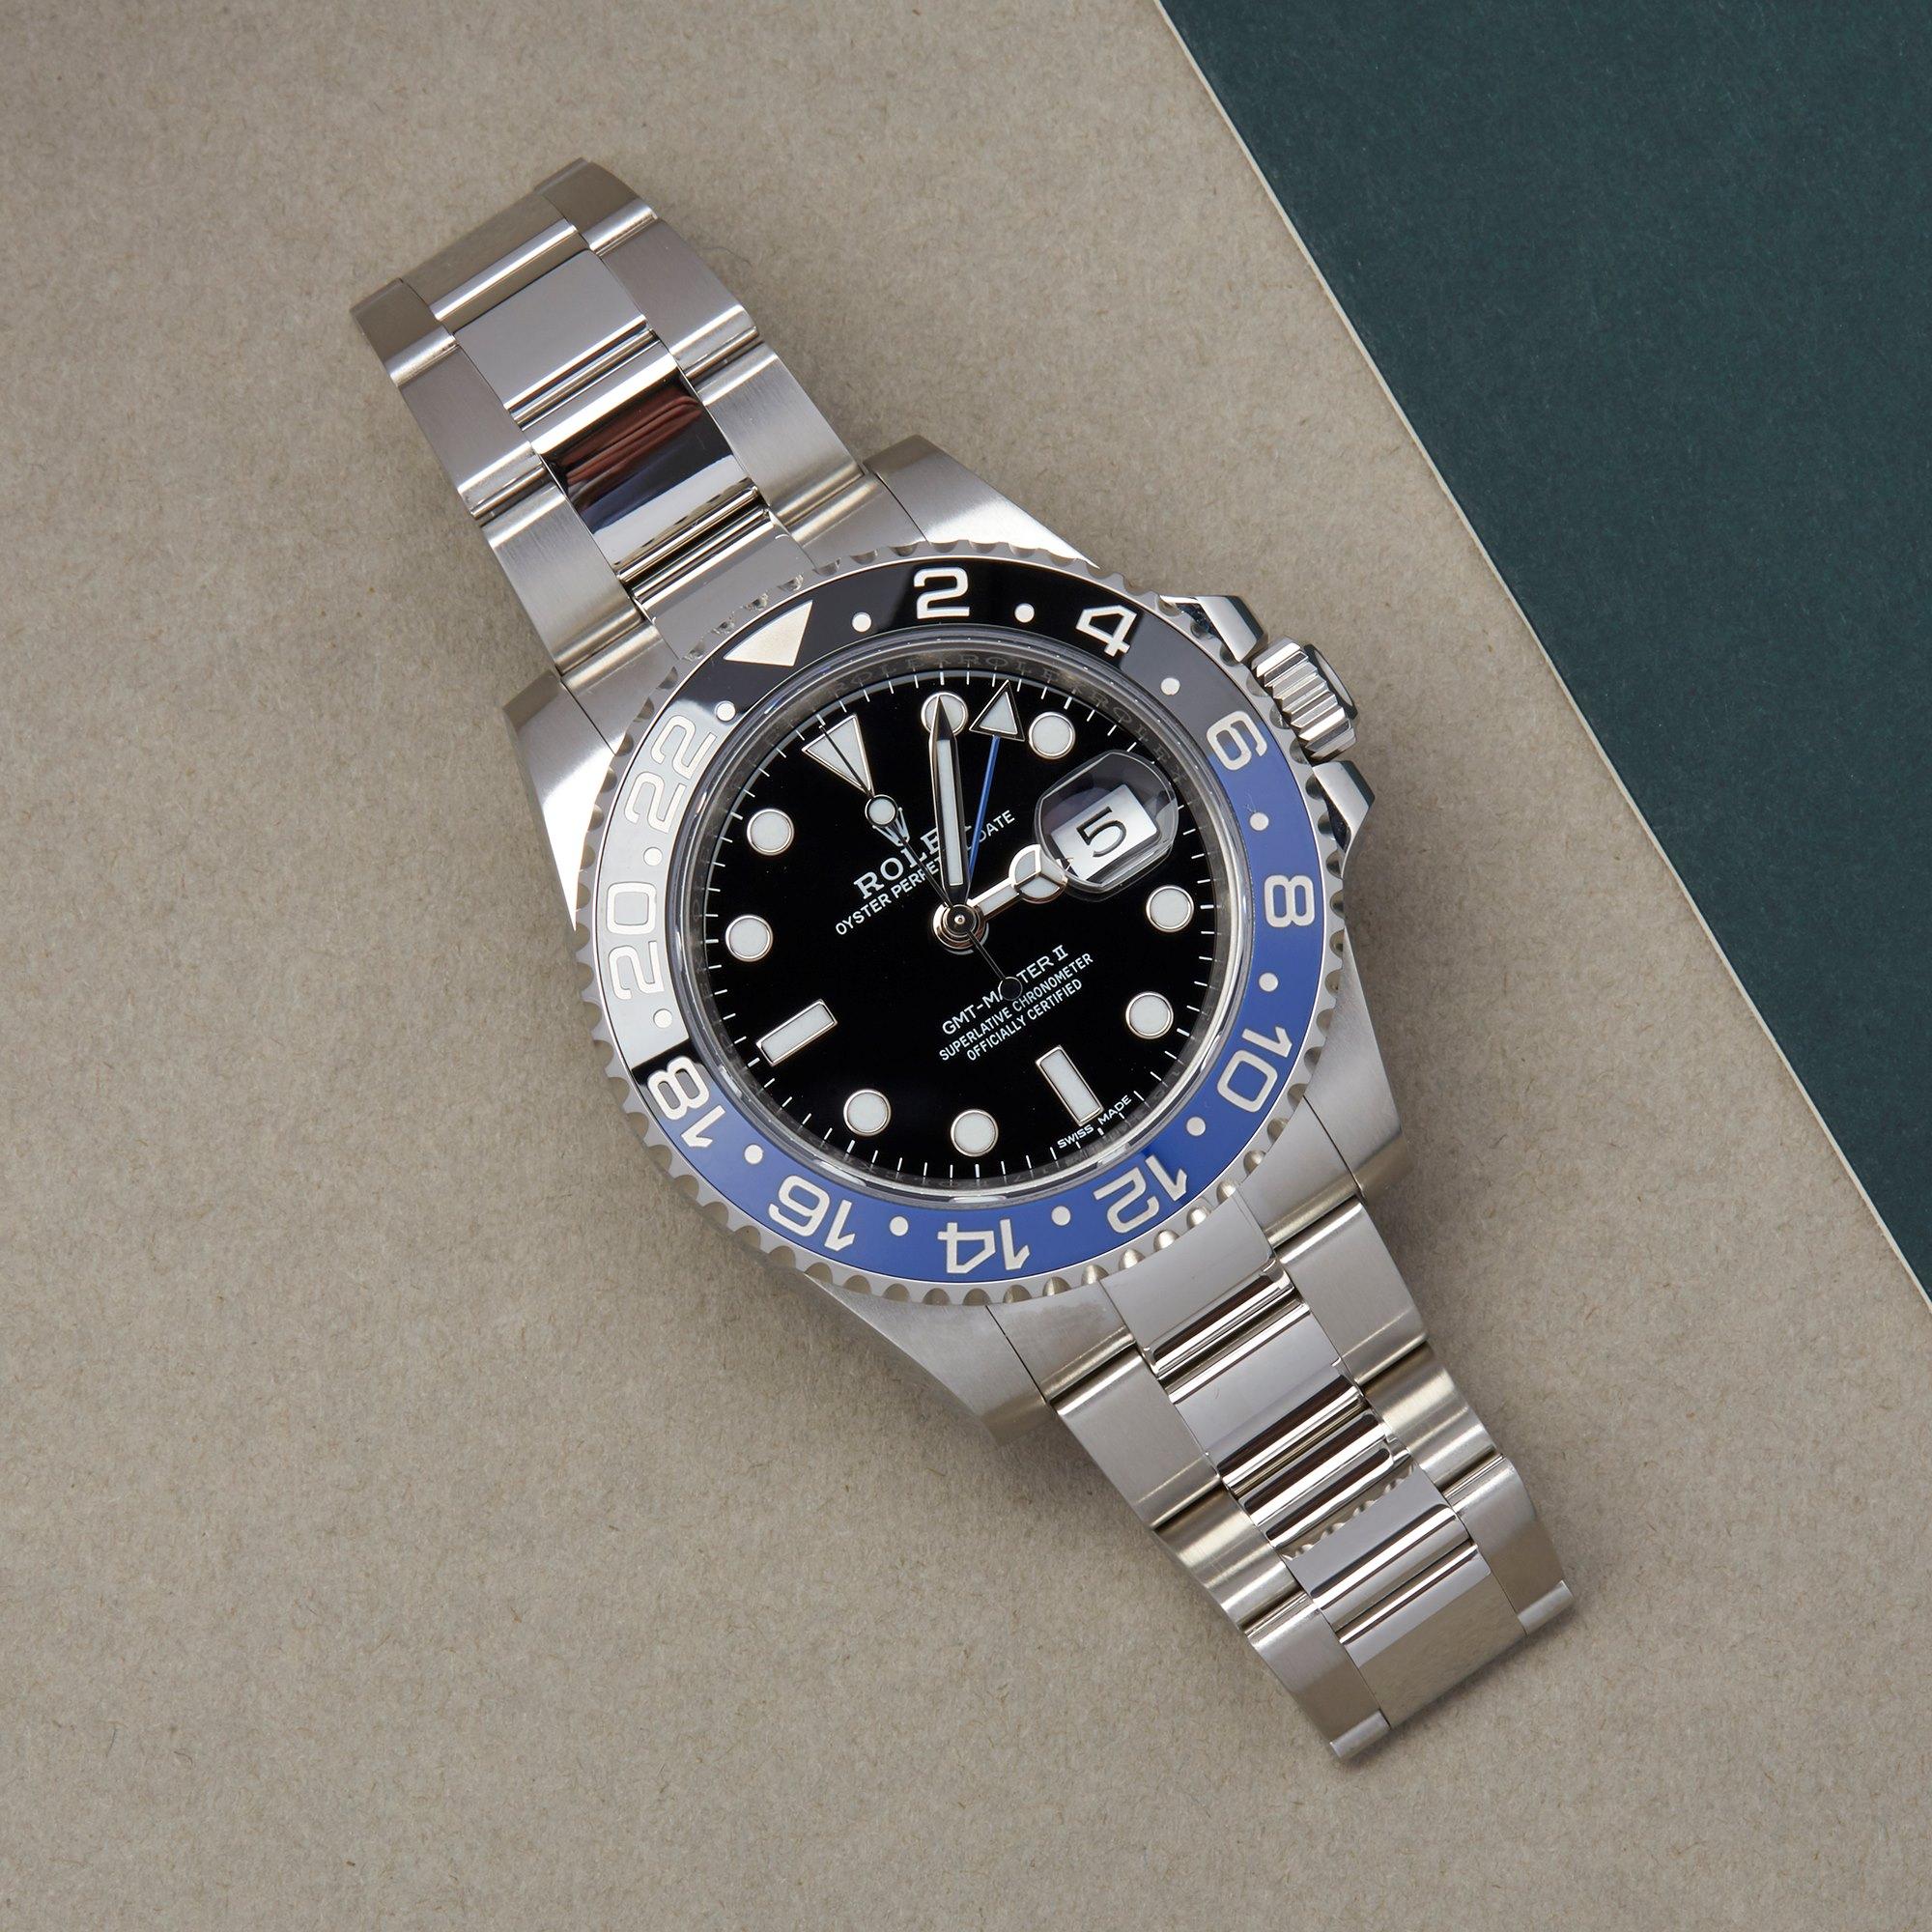 Xupes Reference: W007813
Manufacturer: Rolex
Model: GMT-Master II
Model Variant: 0
Model Number: 116710BLNR
Age: 43710
Gender: Men
Complete With: Rolex Box, Manuals, Card Holder, Swing Tag & Guarantee
Dial: Black Other 
Glass: Sapphire Crystal
Case